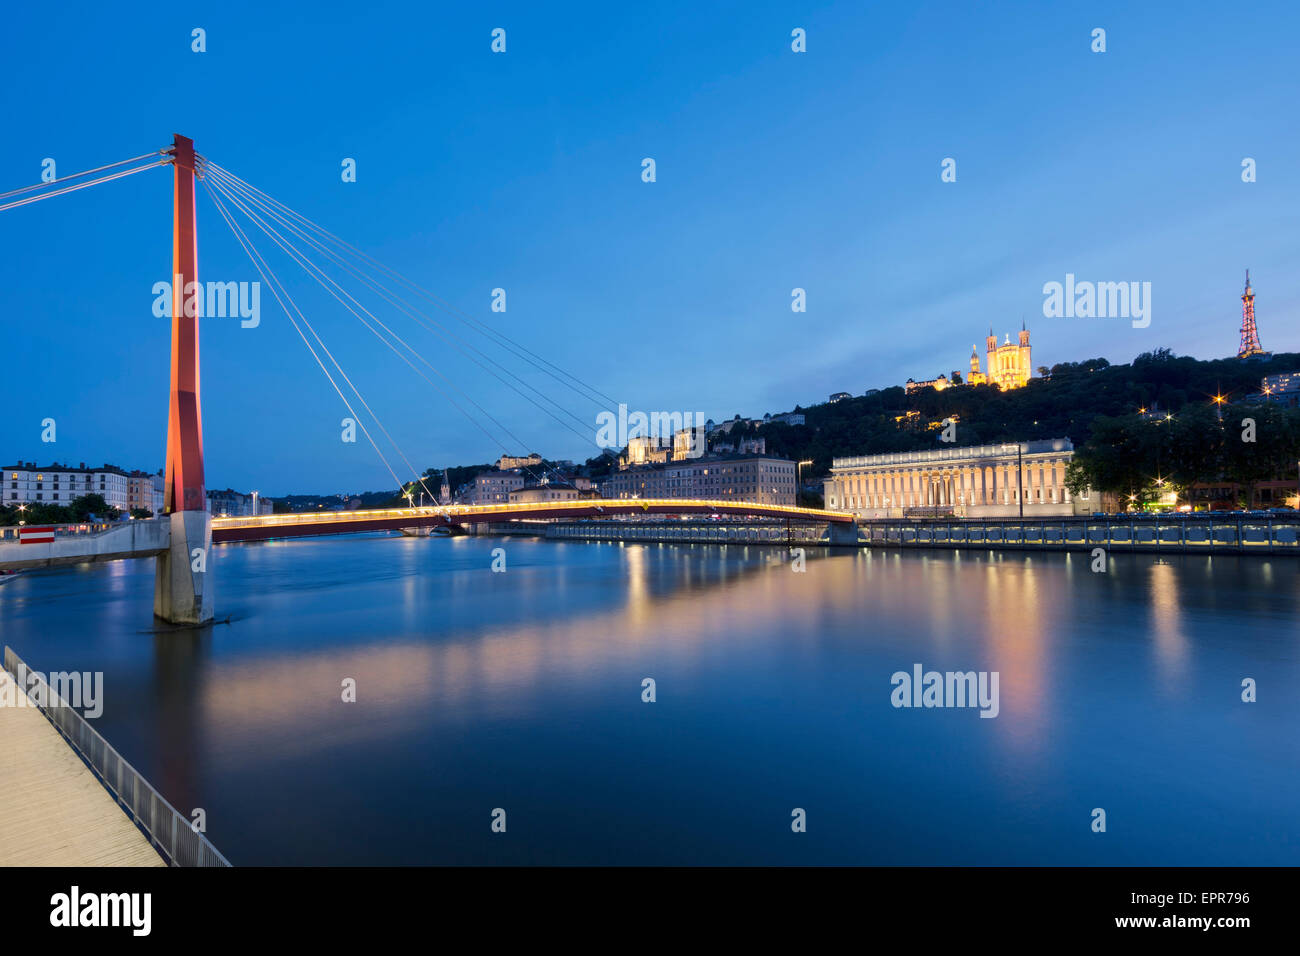 View of Saone river at Lyon by night, France Stock Photo